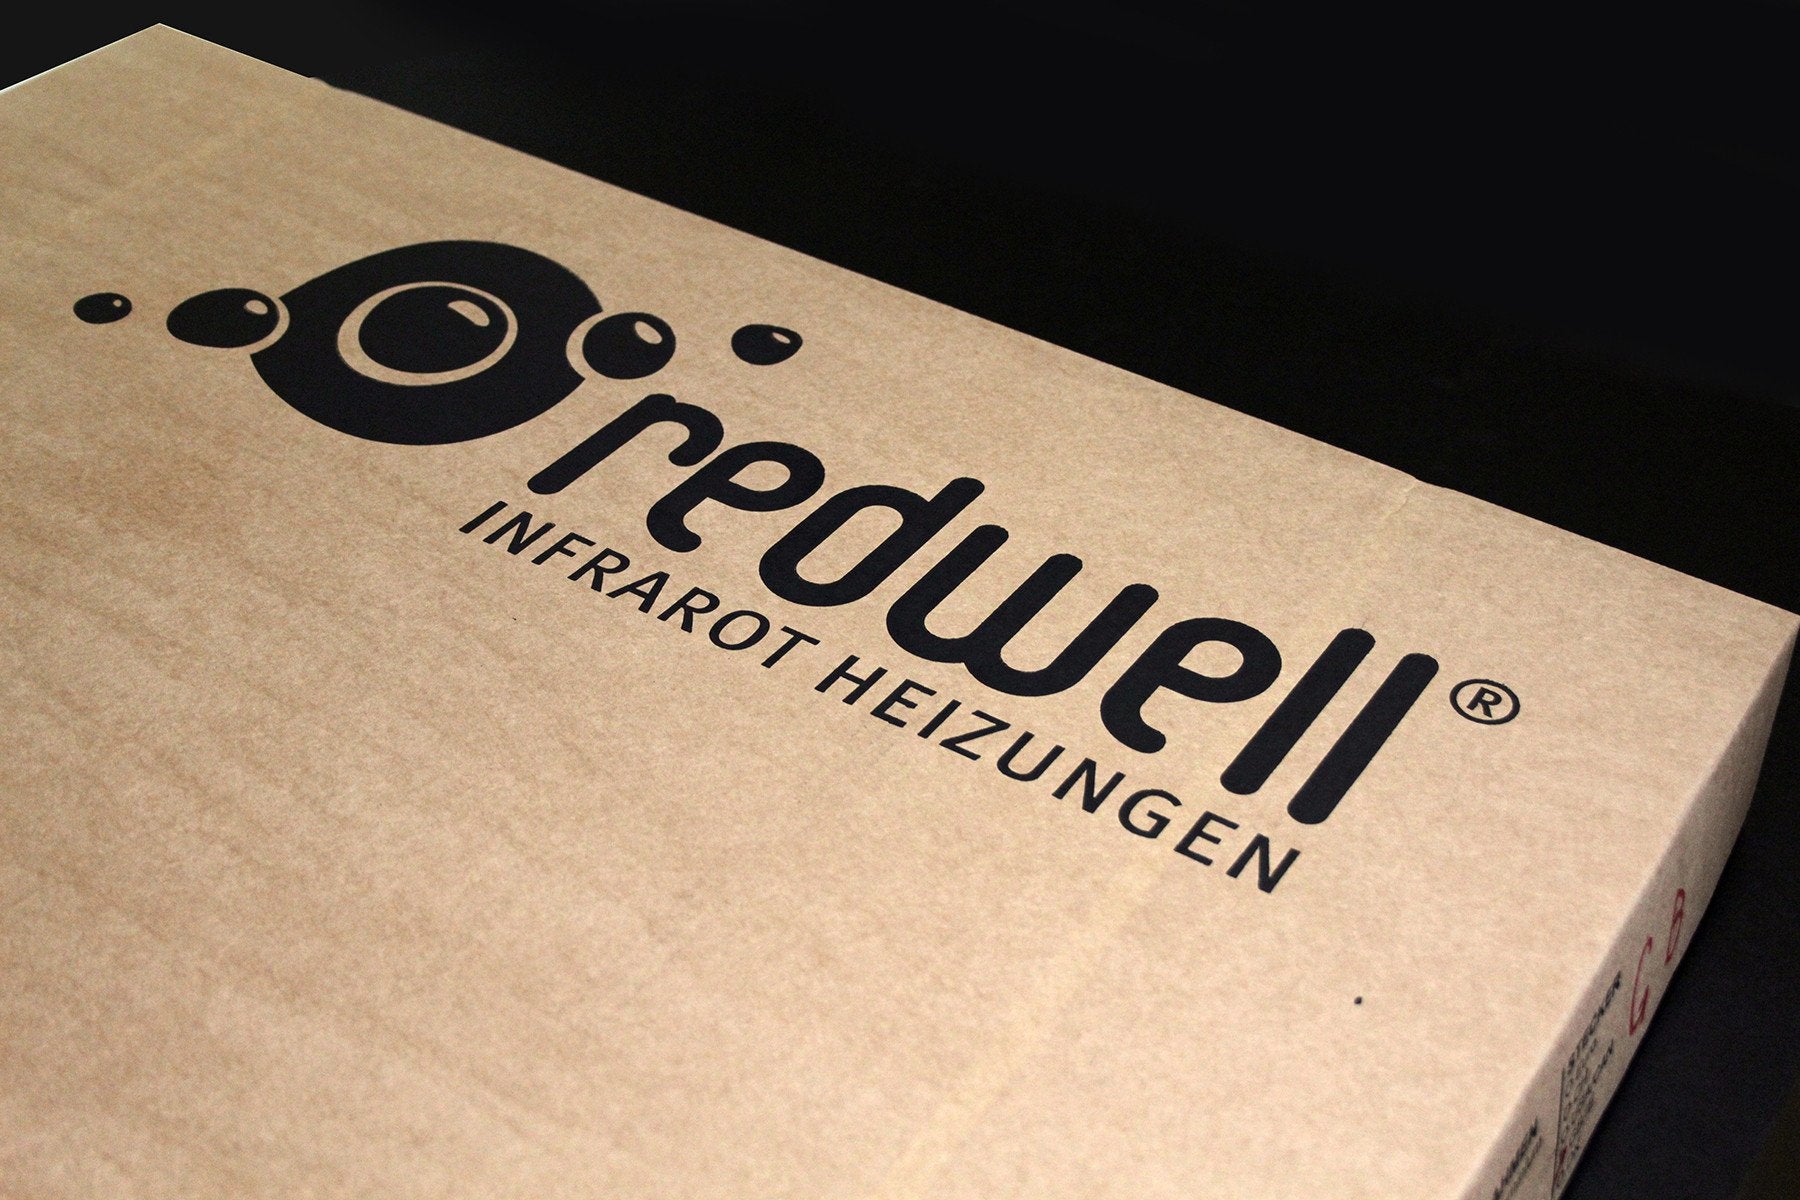 Redwell Heater Packaging